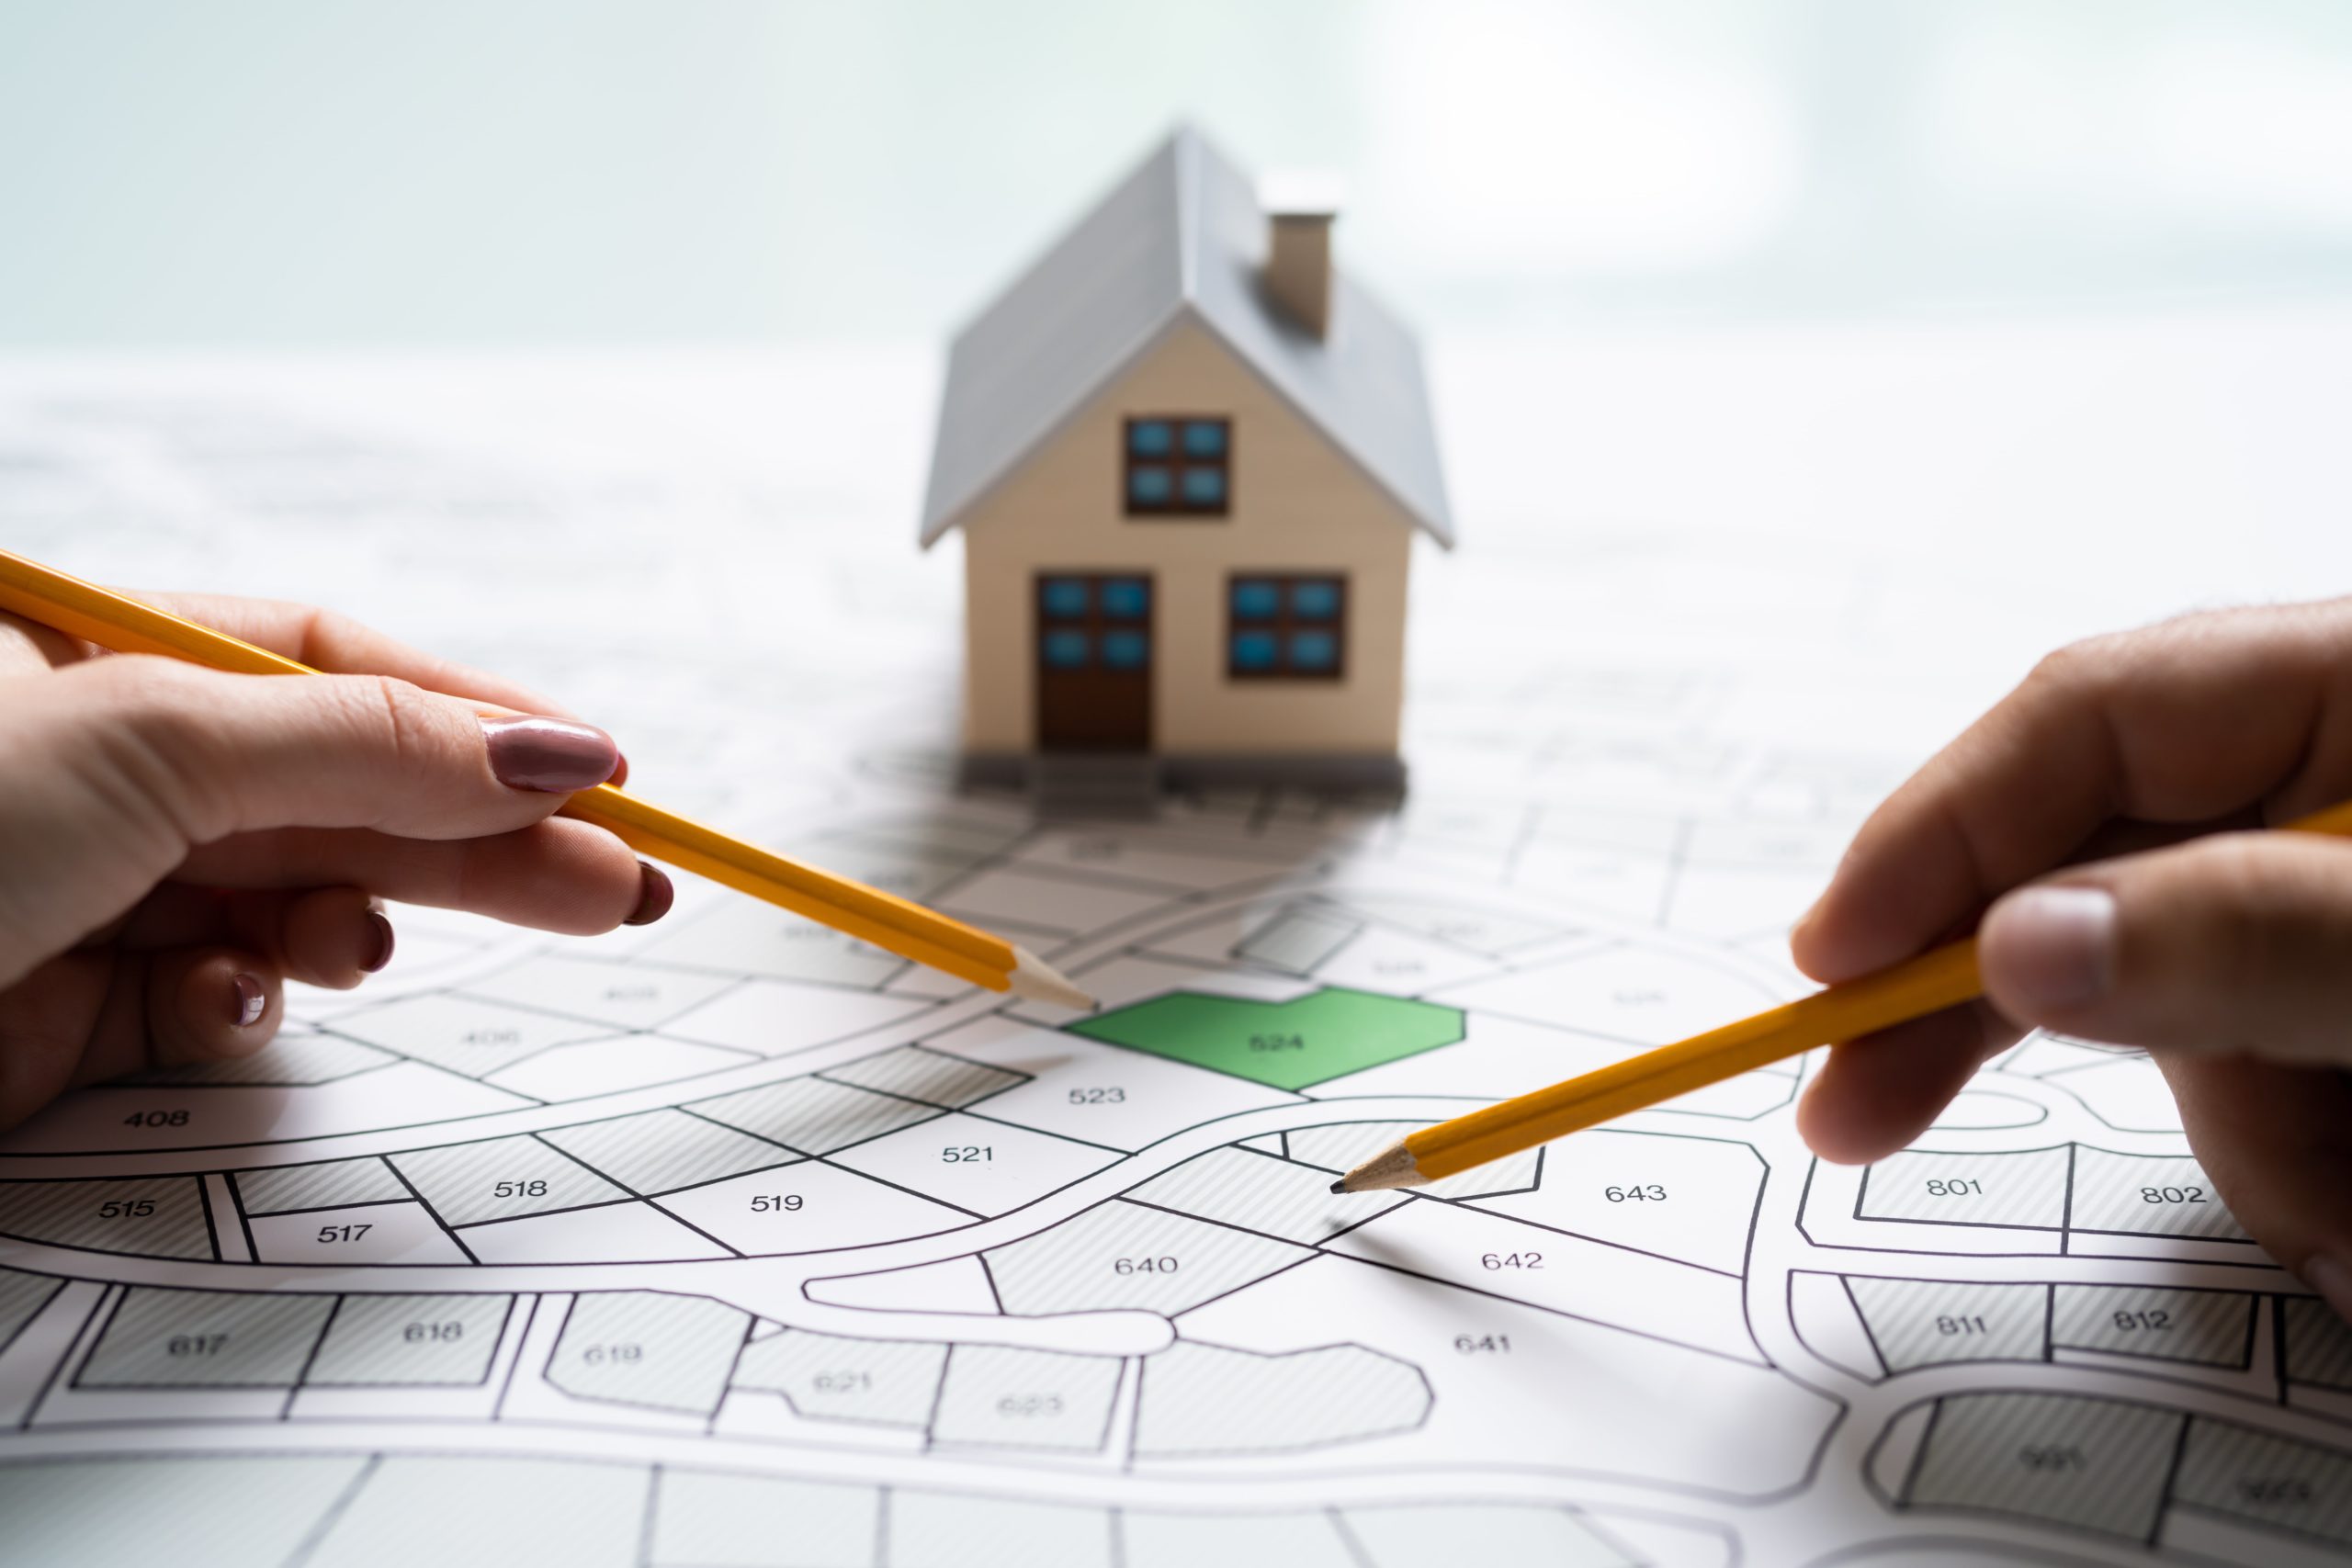 Why Should You Overlook The Locality Of A Property Before Purchasing It?